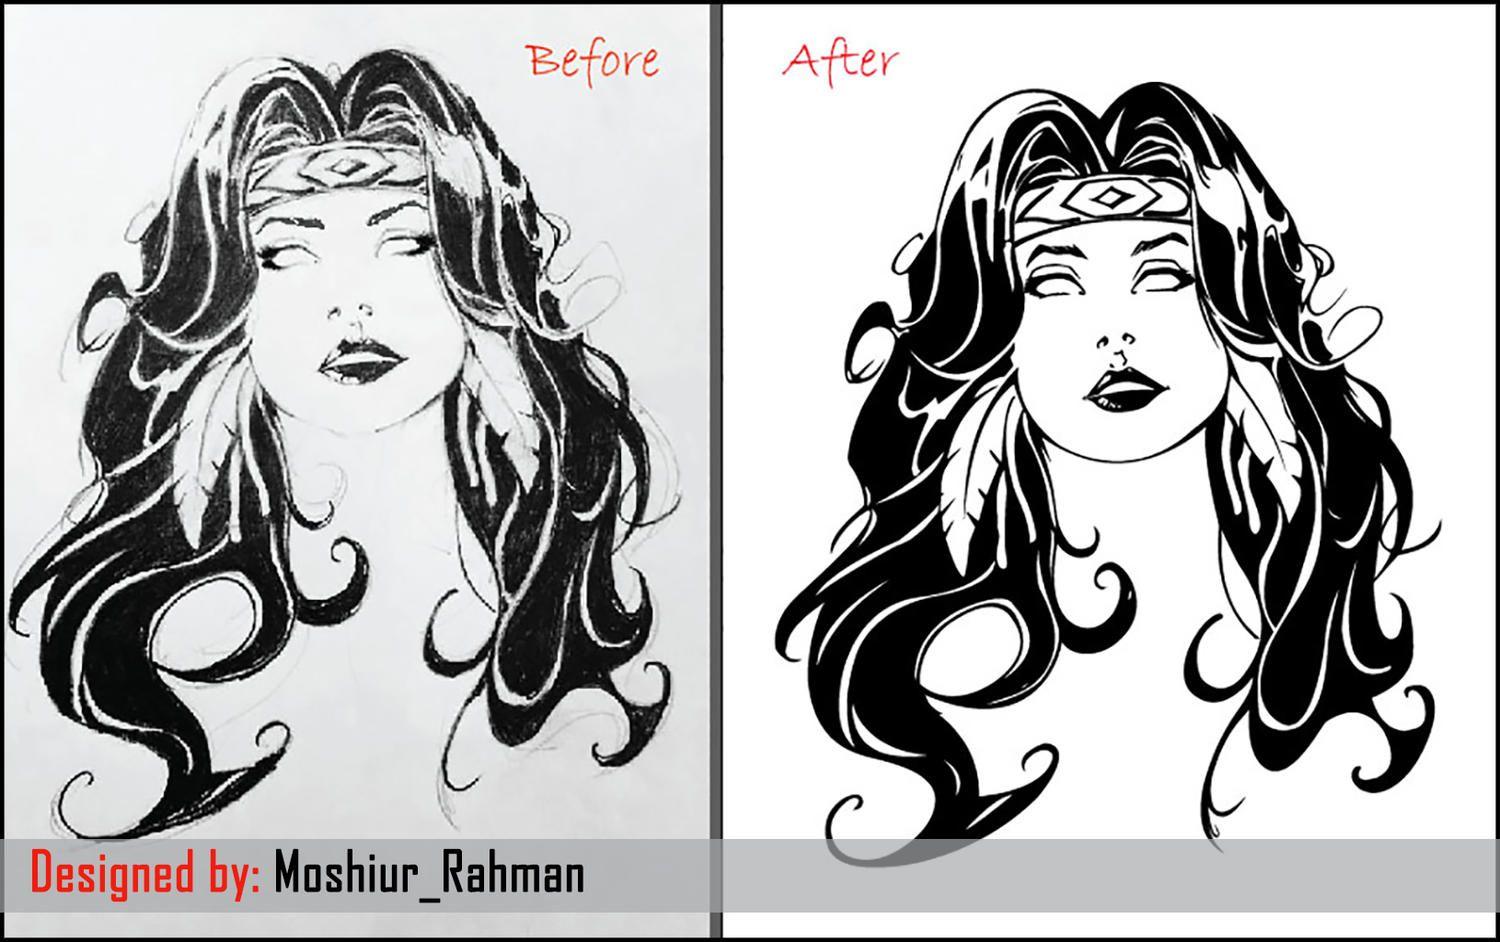 Before and After Superhero Logo - Convert or Redraw Your Logo by Qreati on Envato Studio